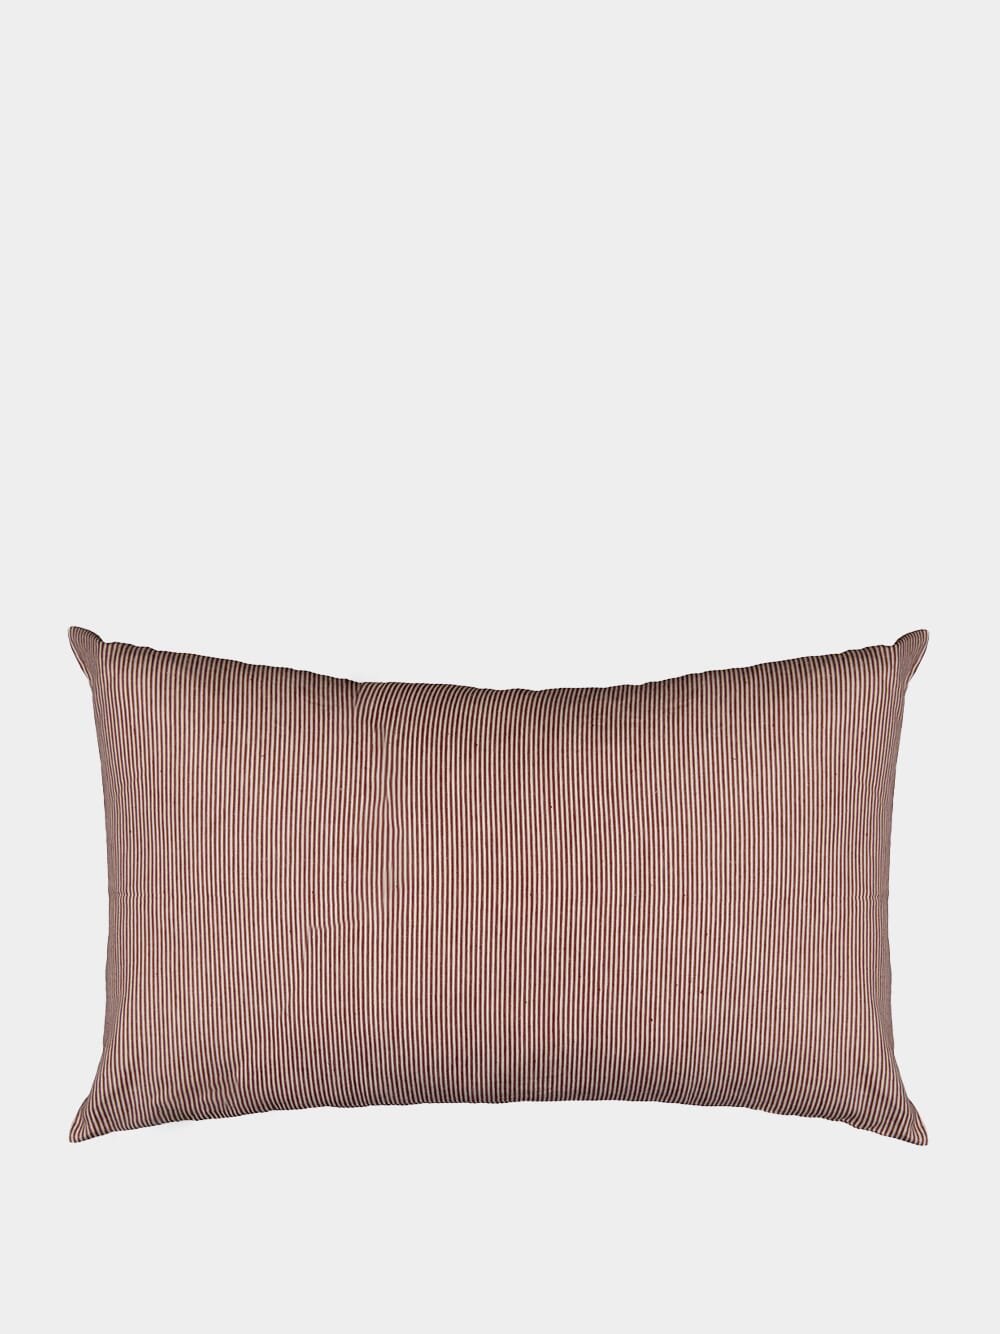 LibecoSwimmers Stripe Pillow at Fashion Clinic